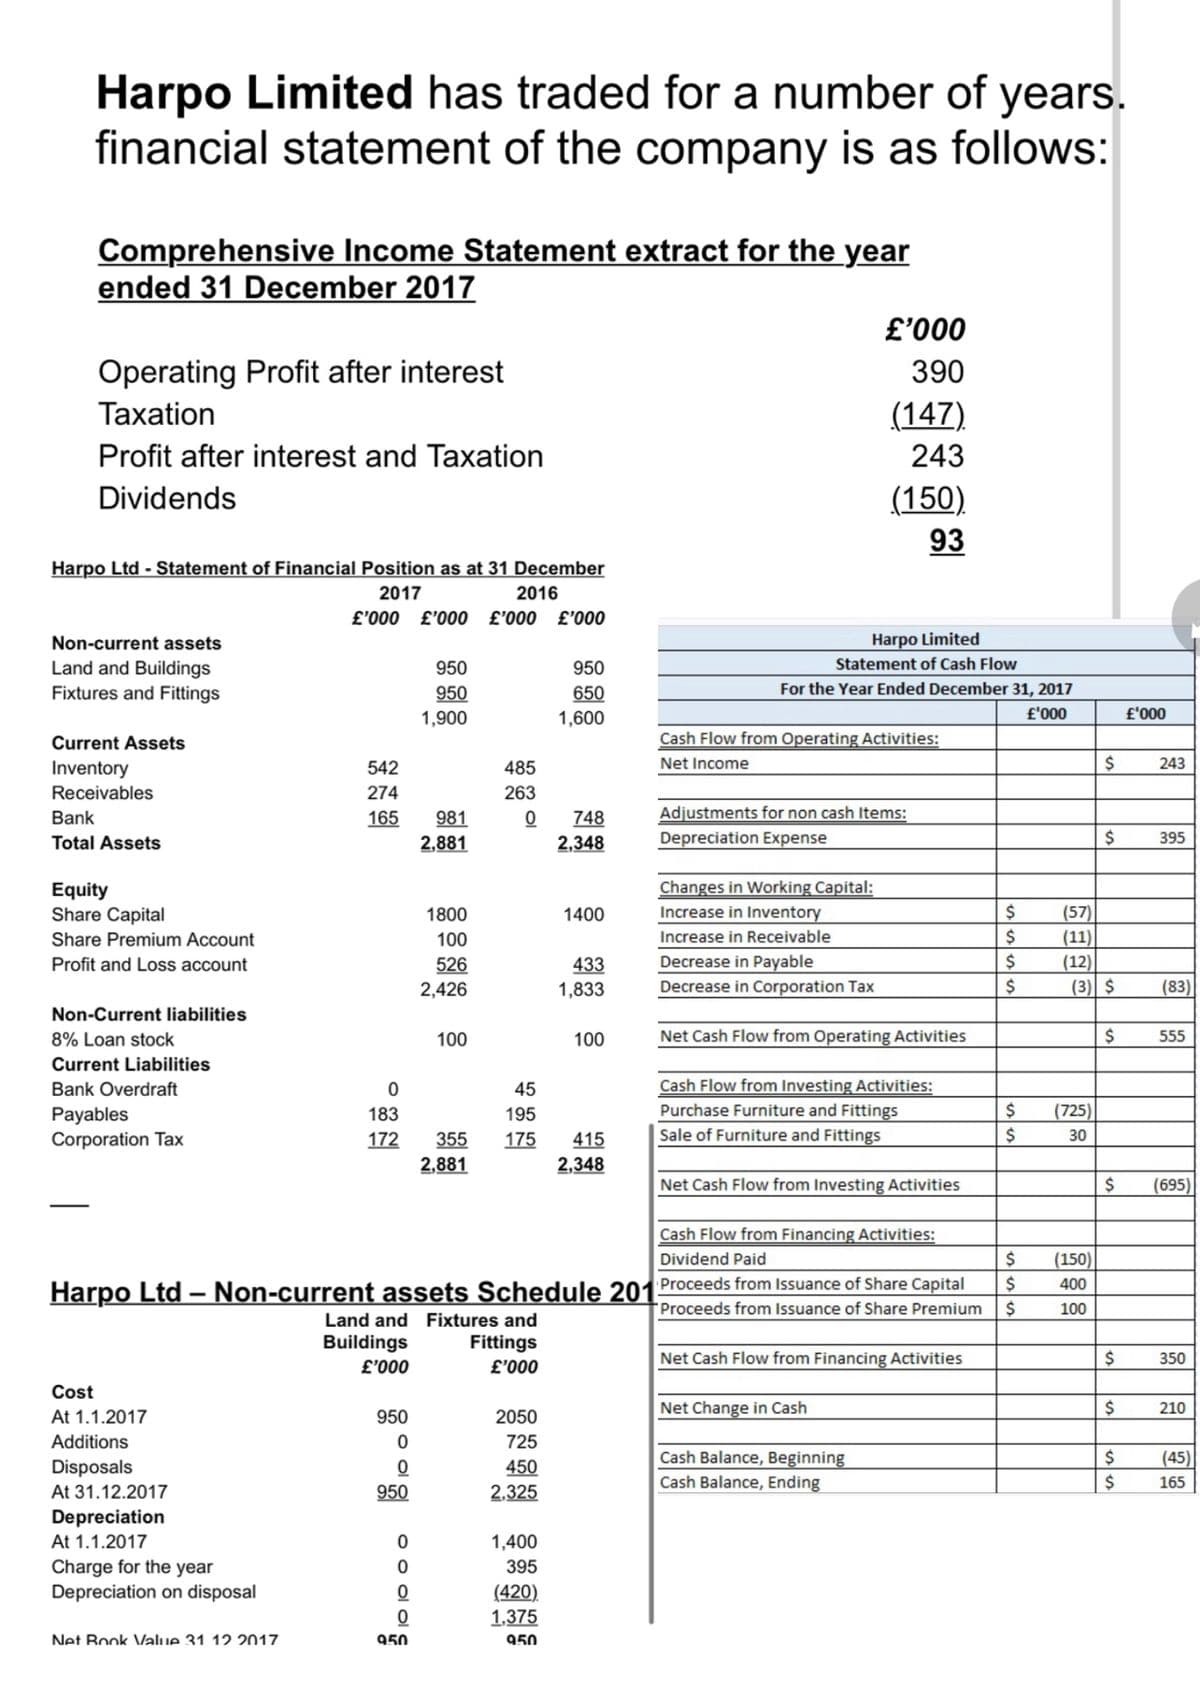 Harpo Limited has traded for a number of years.
financial statement of the company is as follows:
Comprehensive Income Statement extract for the year
ended 31 December 2017
Operating Profit after interest
Taxation
Profit after interest and Taxation
Dividends
Harpo Ltd - Statement of Financial Position as at 31 December
2017
2016
£'000 £'000 £'000 £'000
Non-current assets
Land and Buildings
Fixtures and Fittings
Current Assets
Inventory
Receivables
Bank
Total Assets
Equity
Share Capital
Share Premium Account
Profit and Loss account
Non-Current liabilities
8% Loan stock
Current Liabilities
Bank Overdraft
Payables
Corporation Tax
Cost
At 1.1.2017
Additions
Disposals
At 31.12.2017
Depreciation
At 1.1.2017
Charge for the year
Depreciation on disposal
Net Book Value 31 12 2017
542
274
165 981
2,881
0
183
172
950
od oda
0
950
950
1,900
0
Land and Fixtures and
Fittings
Buildings
£'000
£'000
950
1800
100
526
2,426
950
100
485
263
0
Cash Flow from Investing Activities:
Purchase Furniture and Fittings
Sale of Furniture and Fittings
Net Cash Flow from Investing Activities
Cash Flow from Financing Activities:
Dividend Paid
Harpo Ltd - Non-current assets Schedule 201 Proceeds from Issuance of Share Capital
Proceeds from Issuance of Share Premium
950
650
1,600
2050
725
450
2,325
748
2,348
1,400
395
(420)
1,375
950
1400
433
1,833
45
195
355 175 415
2,881
2,348
100
Harpo Limited
Statement of Cash Flow
For the Year Ended December 31, 2017
£'000
£'000
390
(147).
243
Cash Flow from Operating Activities:
Net Income
Changes in Working Capital:
Increase in Inventory
Increase in Receivable
(150)
93
Adjustments for non cash Items:
Depreciation Expense
Decrease in Payable
Decrease in Corporation Tax
Net Cash Flow from Operating Activities
Net Change in Cash
Net Cash Flow from Financing Activities
Cash Balance, Beginning
Cash Balance, Ending
SSSS
$
$
$
$
$
(57)
(11)
(12)
(725)
30
$
(3) $
(150)
400
100
$
$
$
$
£'000
$ 555
$
$
243
395
(83)
(695)
350
210
(45)
165